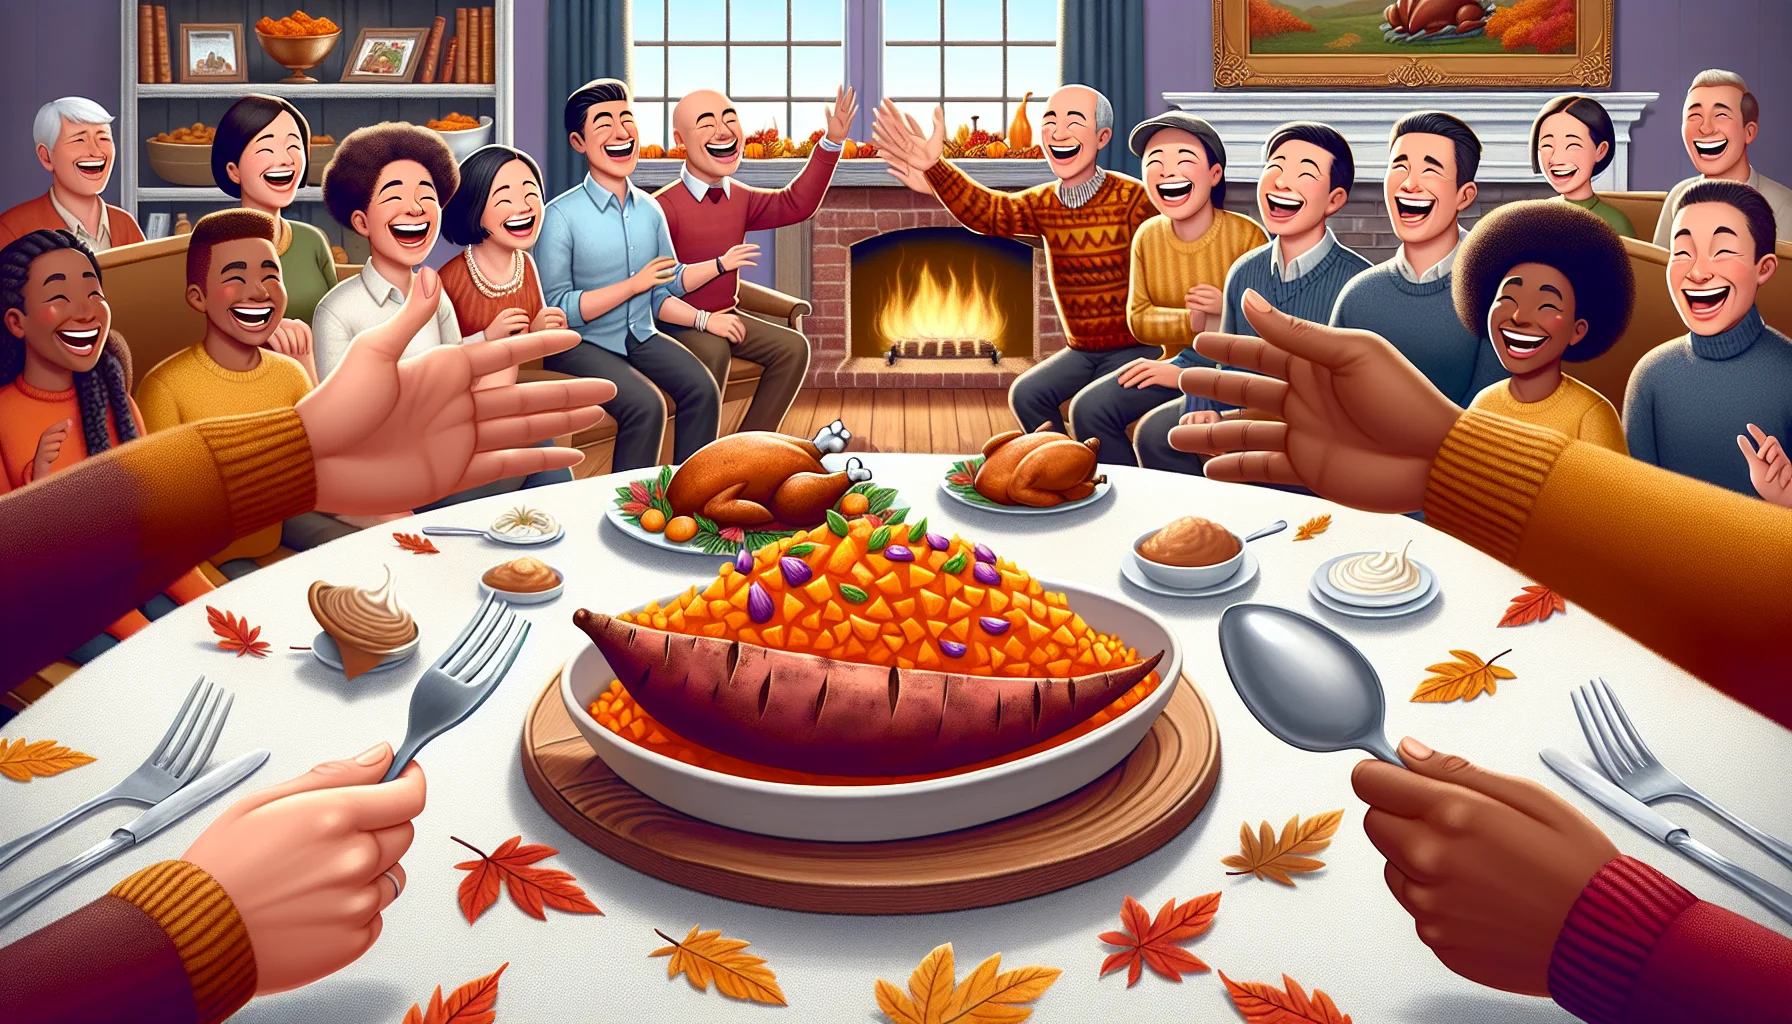 Illustrate an amusing scenario intending to promote healthy and affordable eating on Thanksgiving. On the table is a luscious sweet potato side dish, looking colorful and delicious. Around the table, people of various descents and genders are laughing heartily and reaching out eagerly for the dish. Sprinkle the setting with hints of a warm and enjoyable Thanksgiving ambiance, like a calming fire in a fireplace, classic Turkey decor, and autumnal leaves subtly decorated. The overall tone should convey the message that making healthier choices need not compromise on the joy of the holiday.